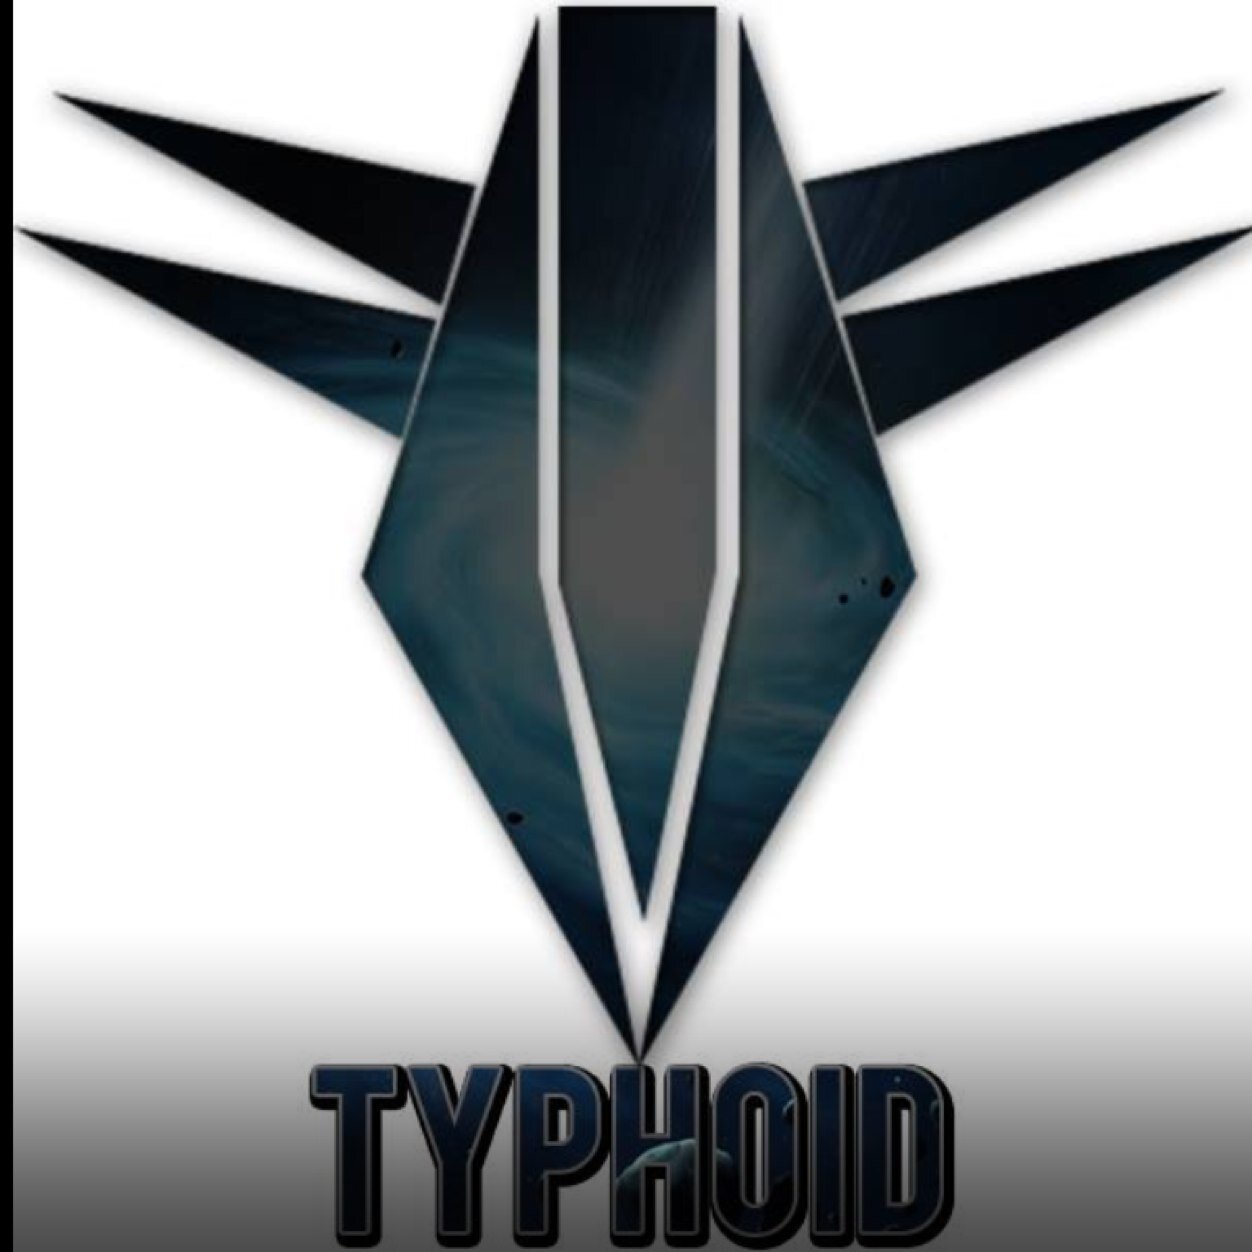 ⭐️Official Twitter for Team Typhoid⭐️We sponsored by @CinchGaming and @NoScopeGlasses⭐️Advanced Warfare we will play for life⭐️